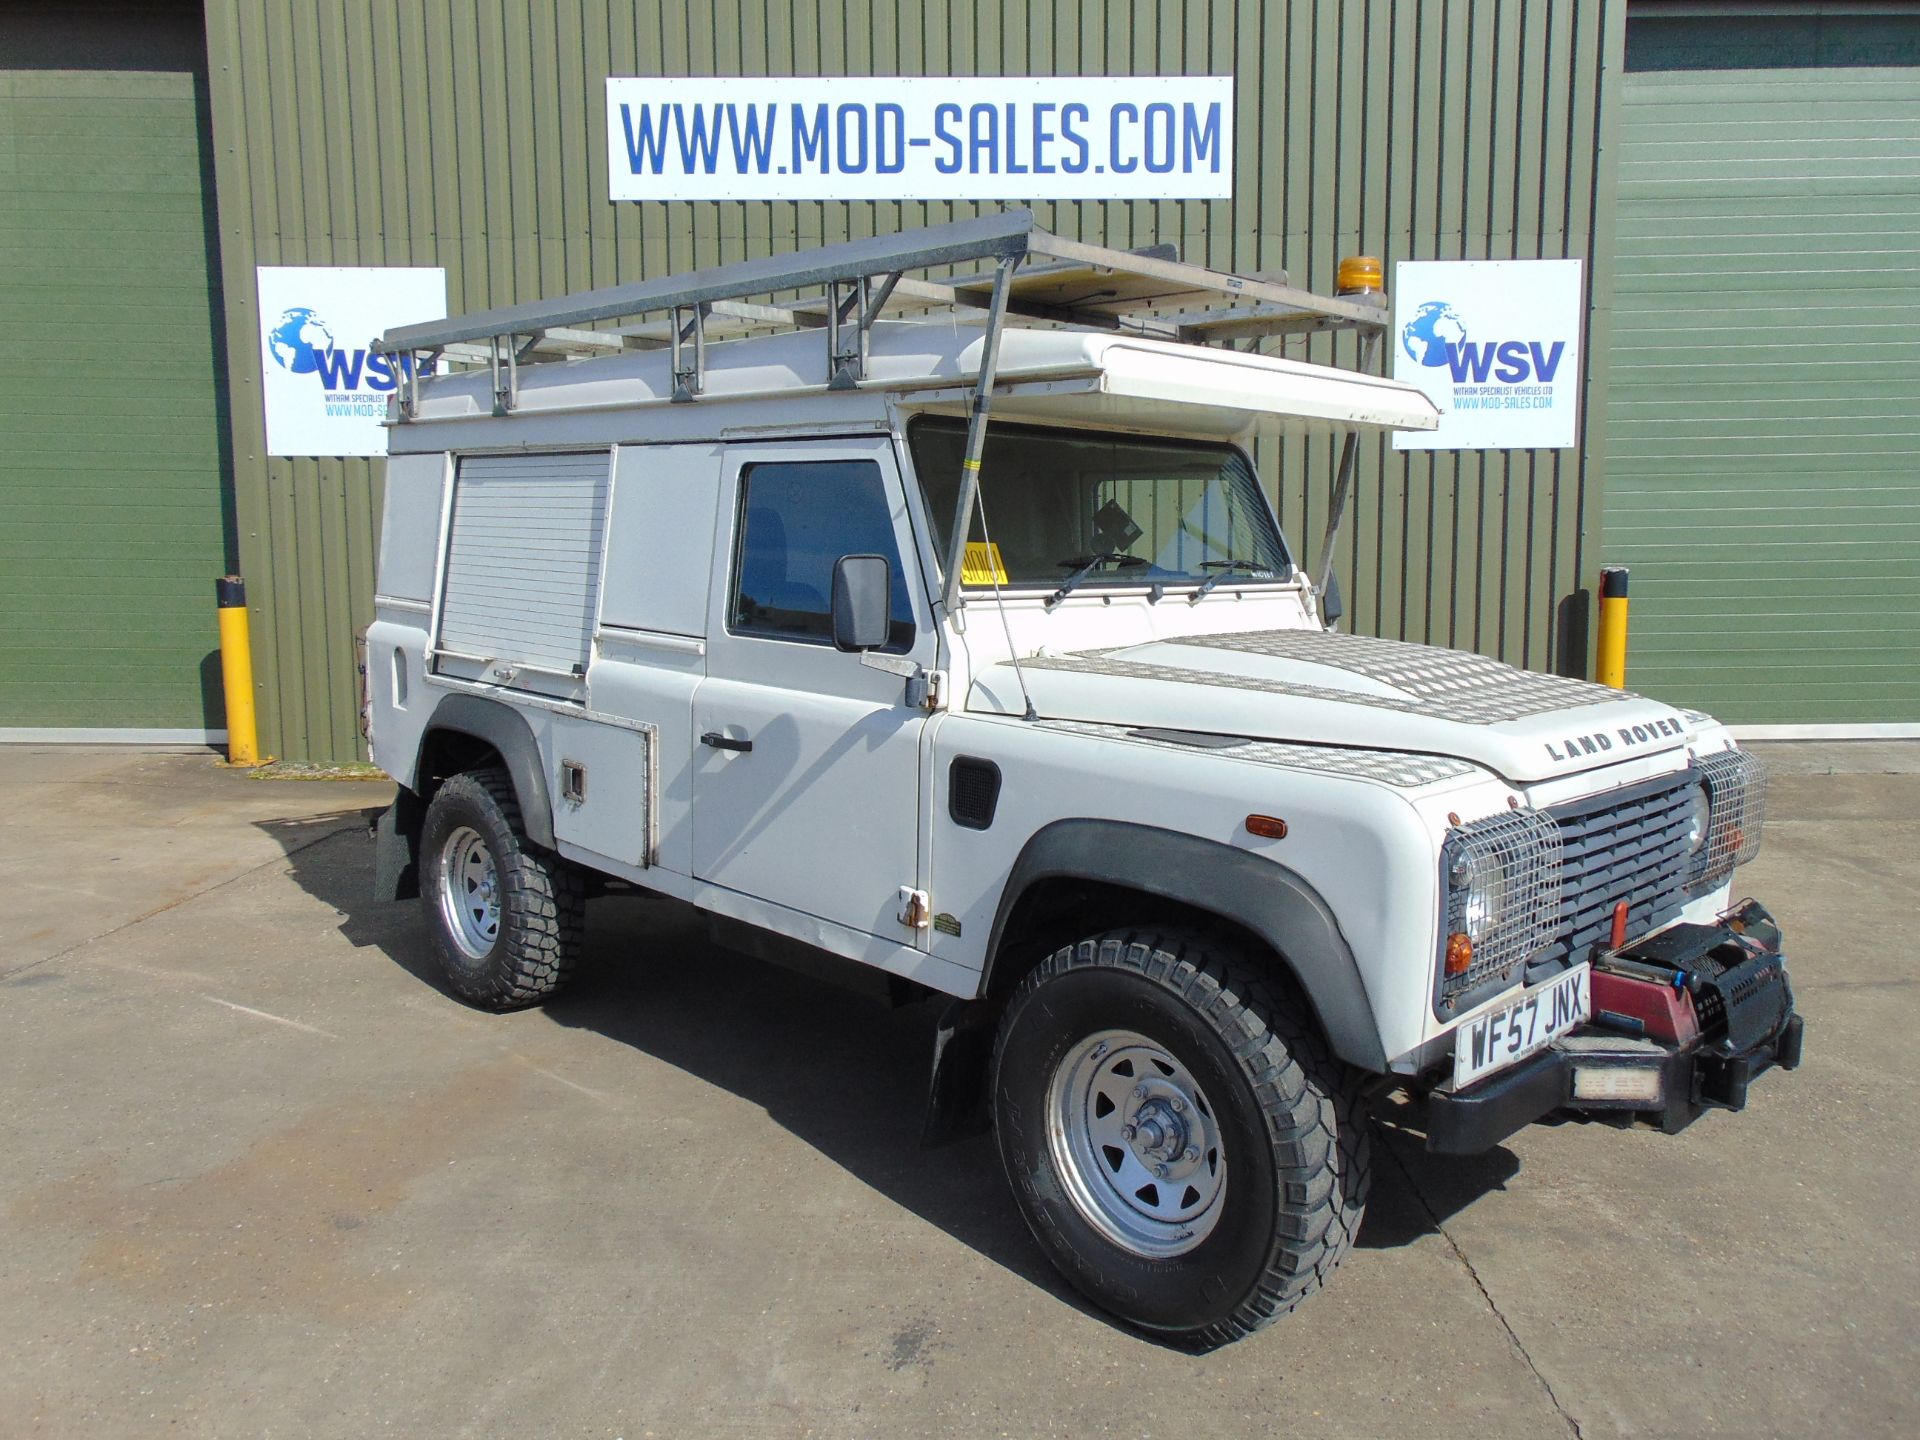 Lot 70 - 2007 Land Rover Defender 110 Puma Hardtop 4x4 Special Utility (Mobile Workshop) complete with Winch